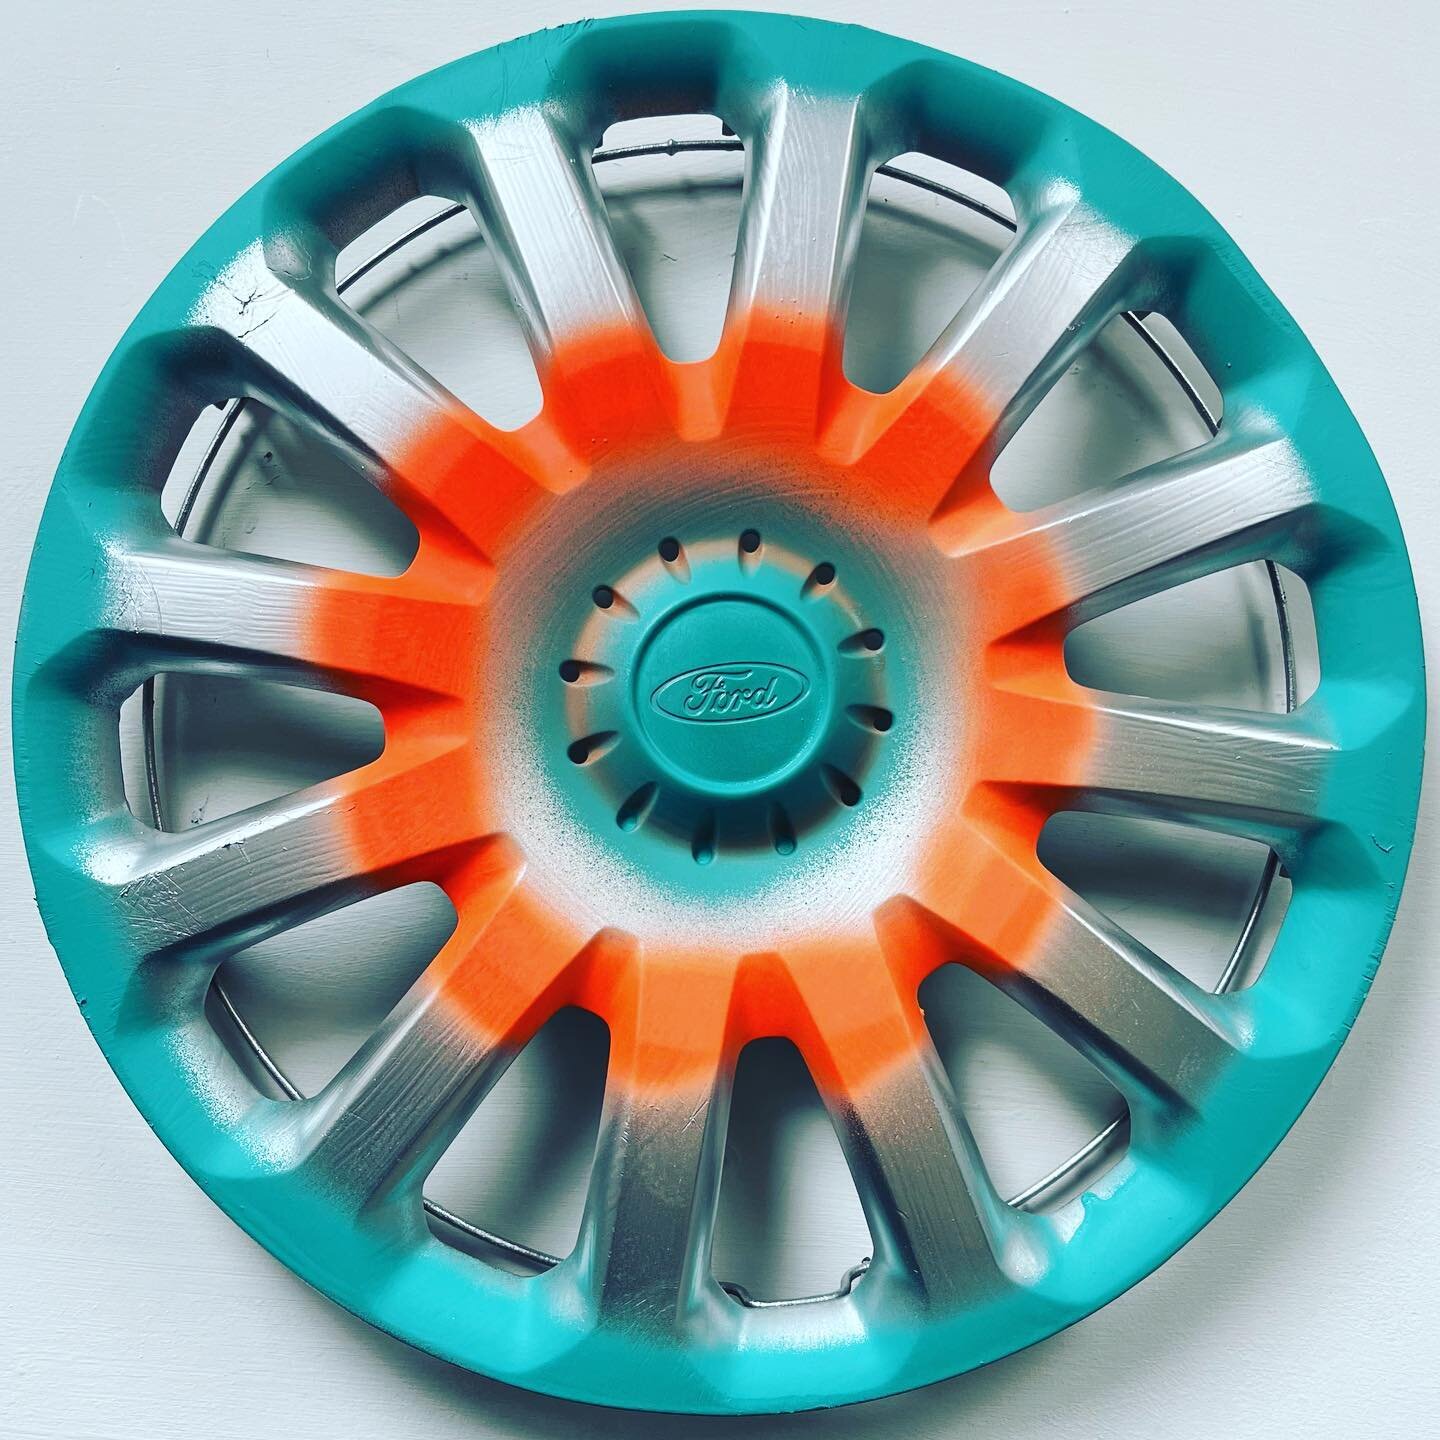 Turquoise. Chrome. Orange. 
A trimendous combination for this @forduk trim. 

Swipe right for progress piccies. 👀